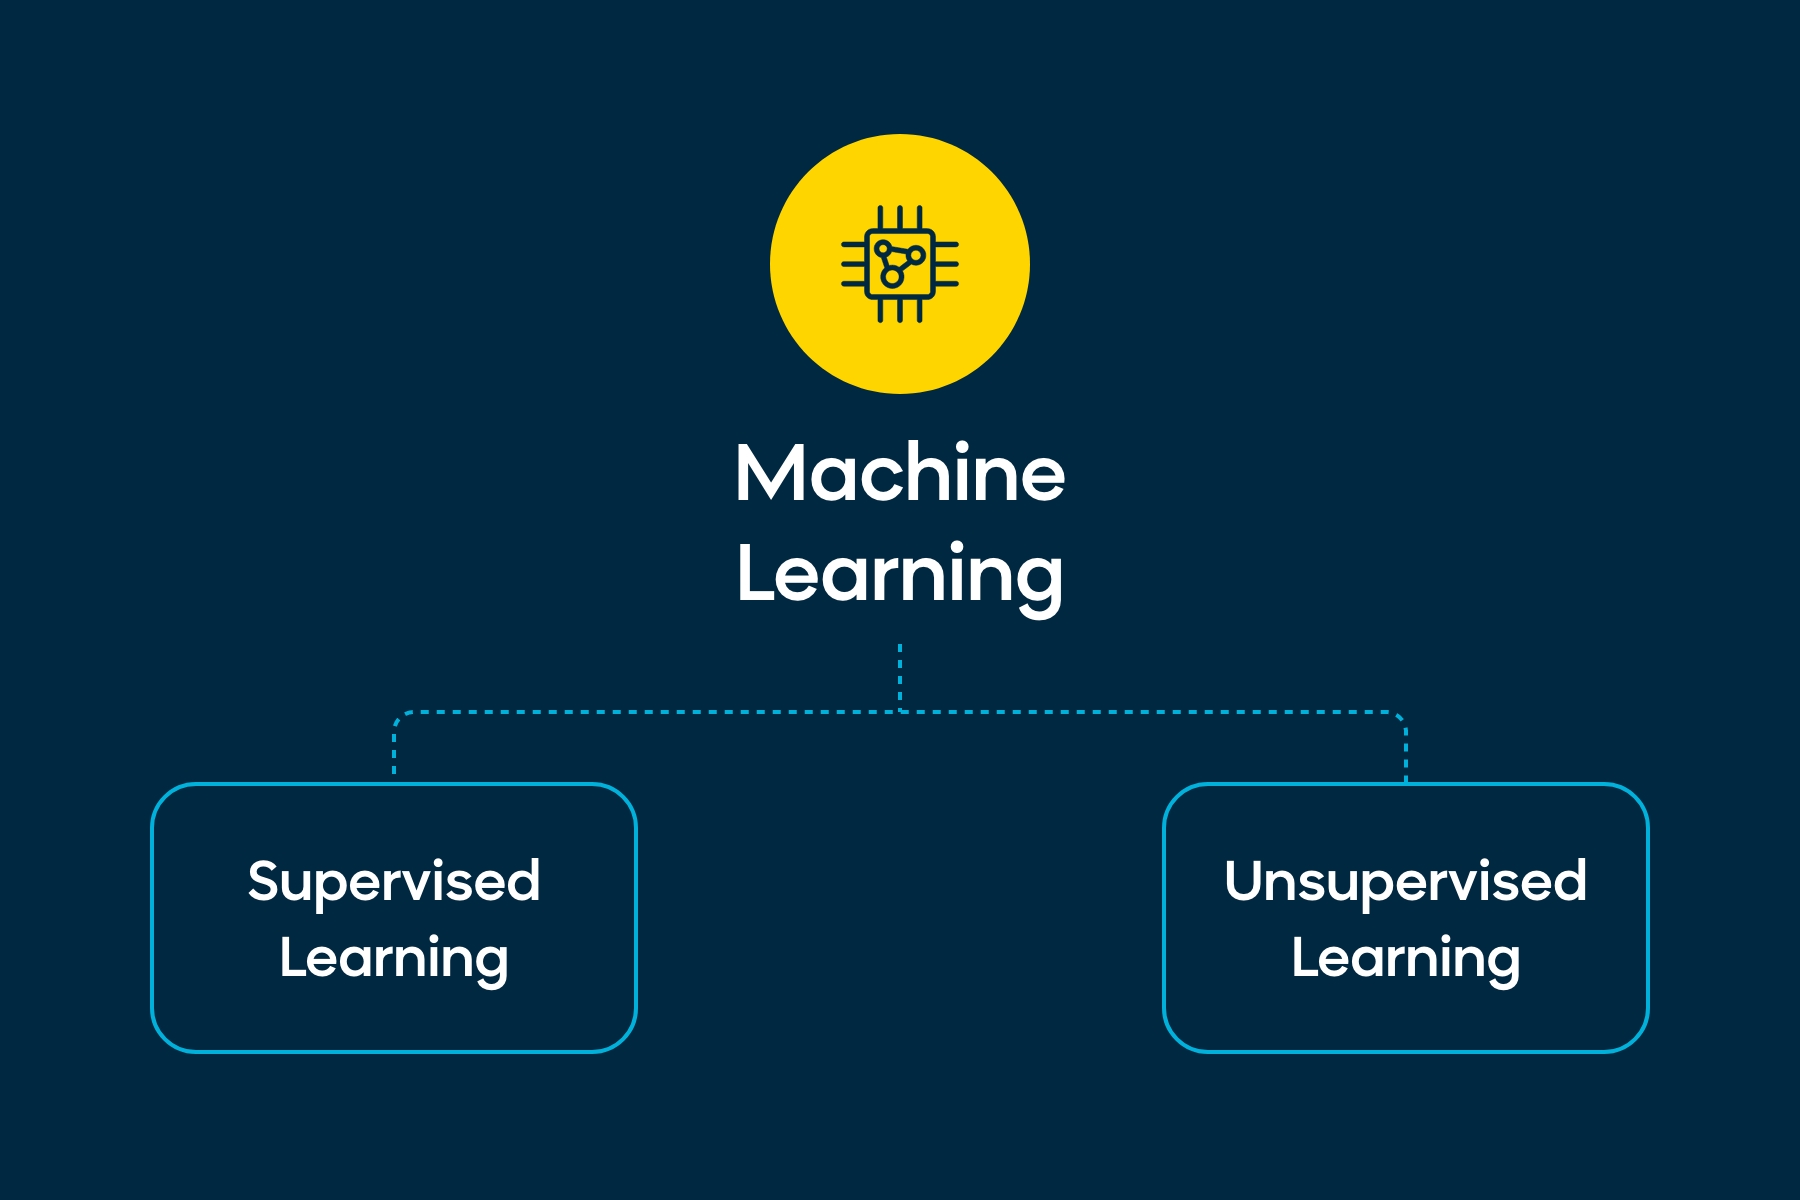 two main types of machine learning tasks: supervised and unsupervised.